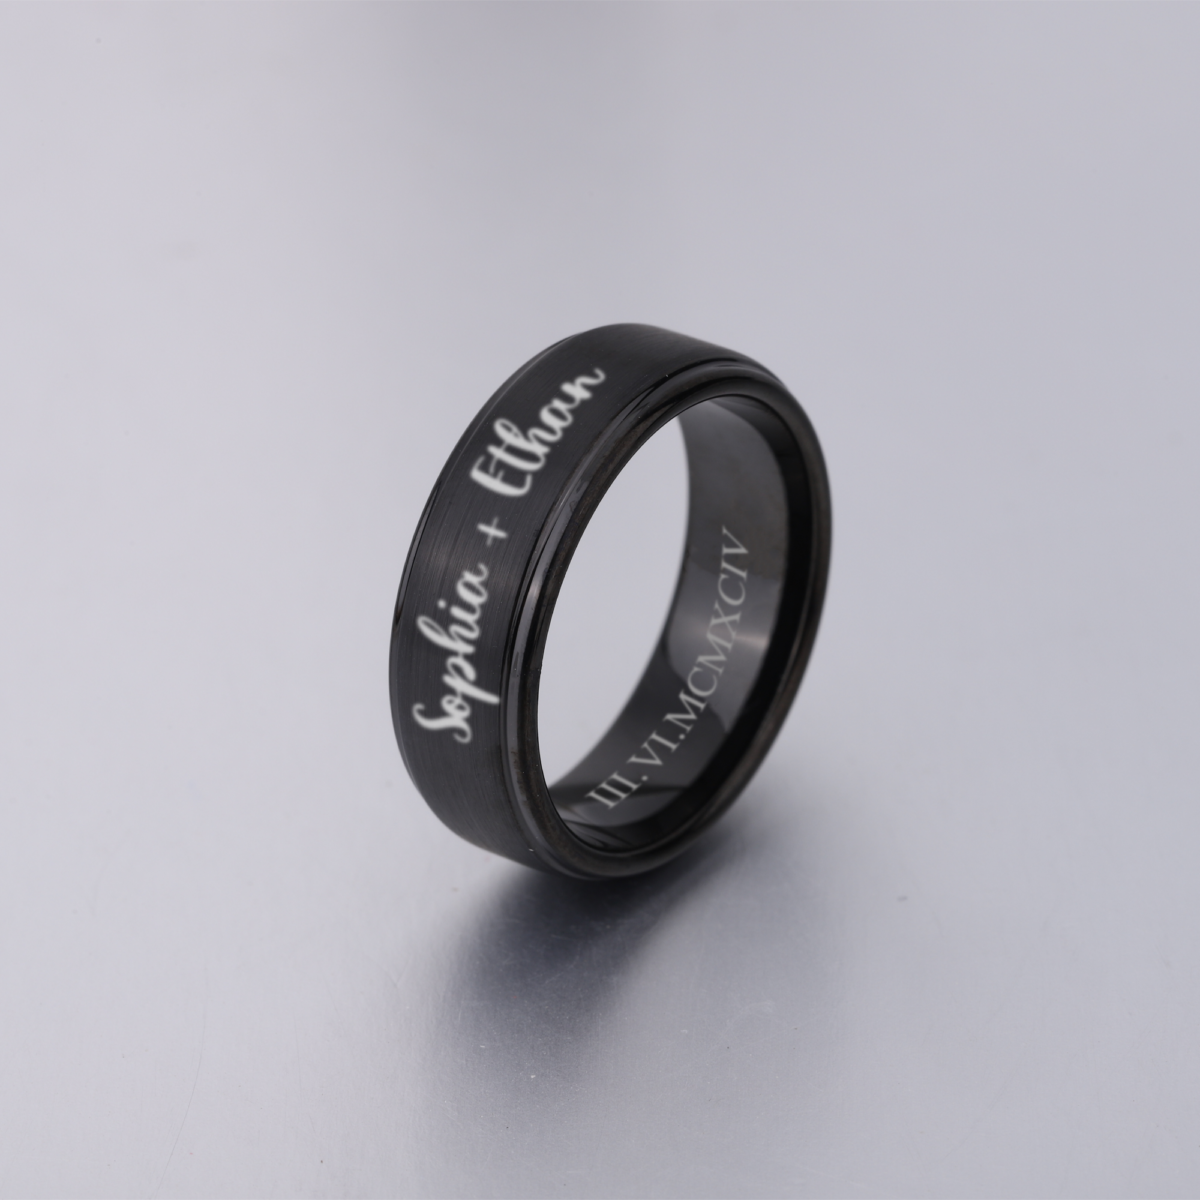 5 Unique Engraving Ideas to Personalize Your Custom Engraved Ring